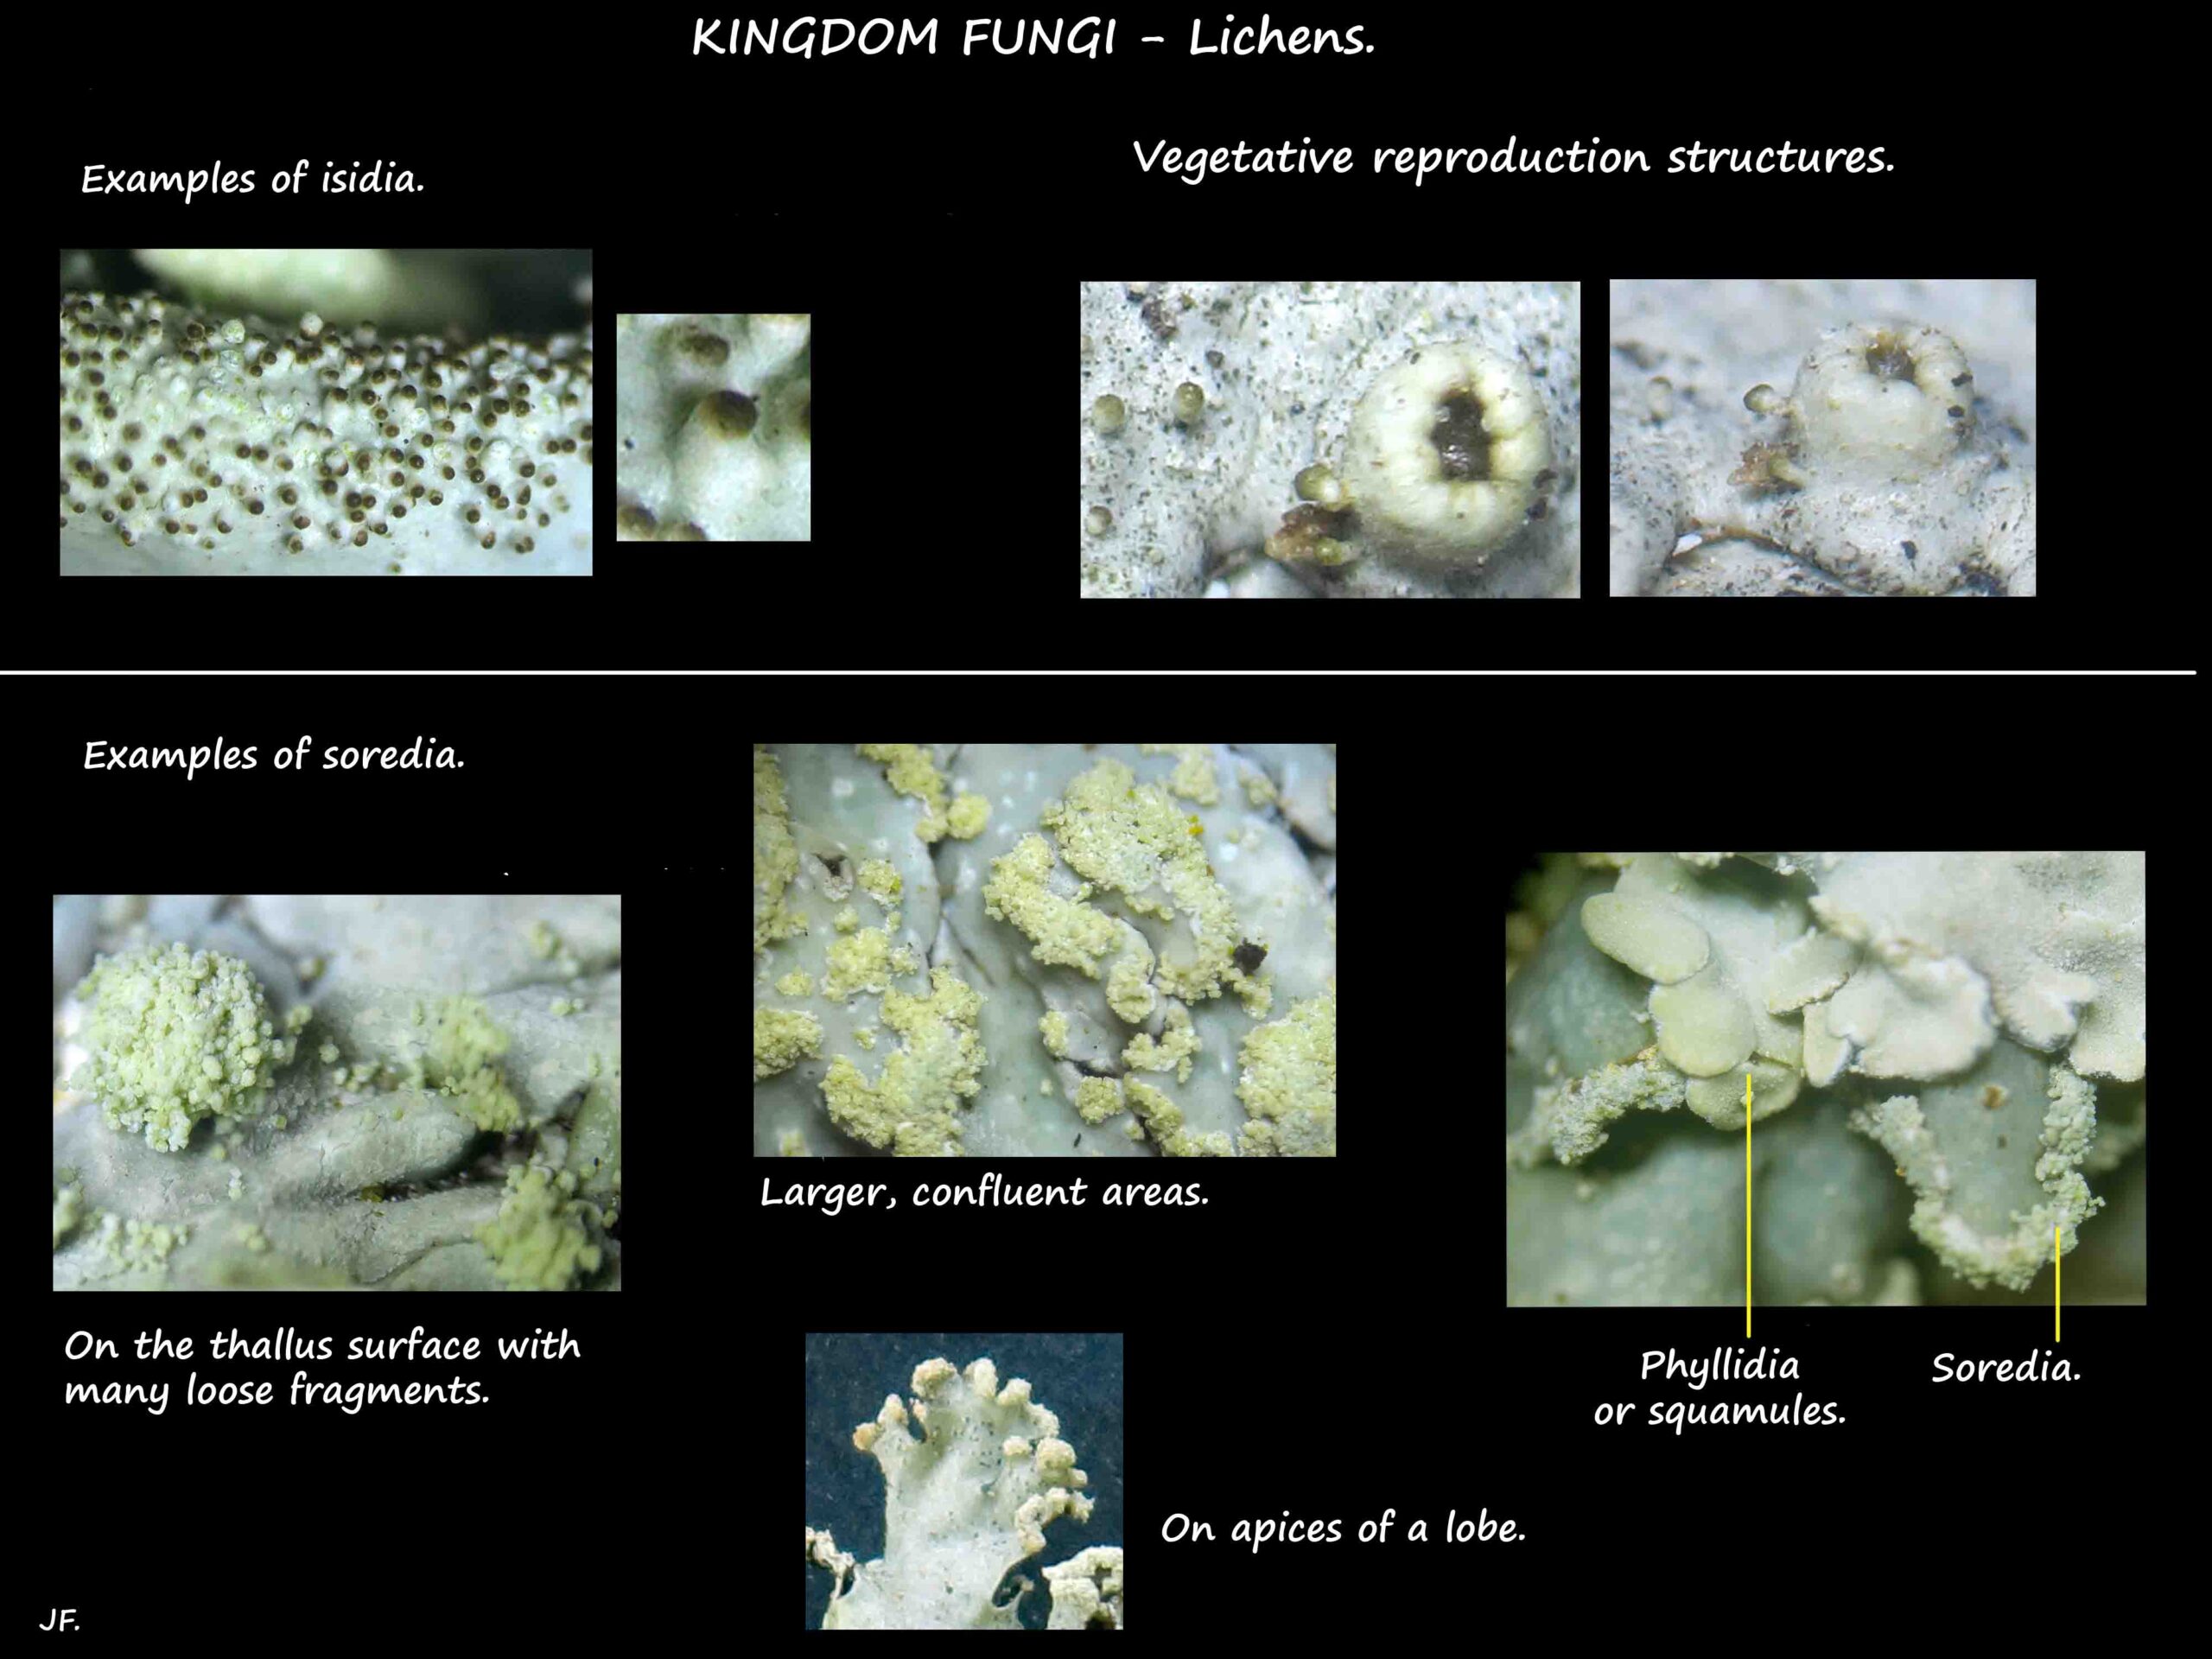 7 Vegetative reproduction in lichens